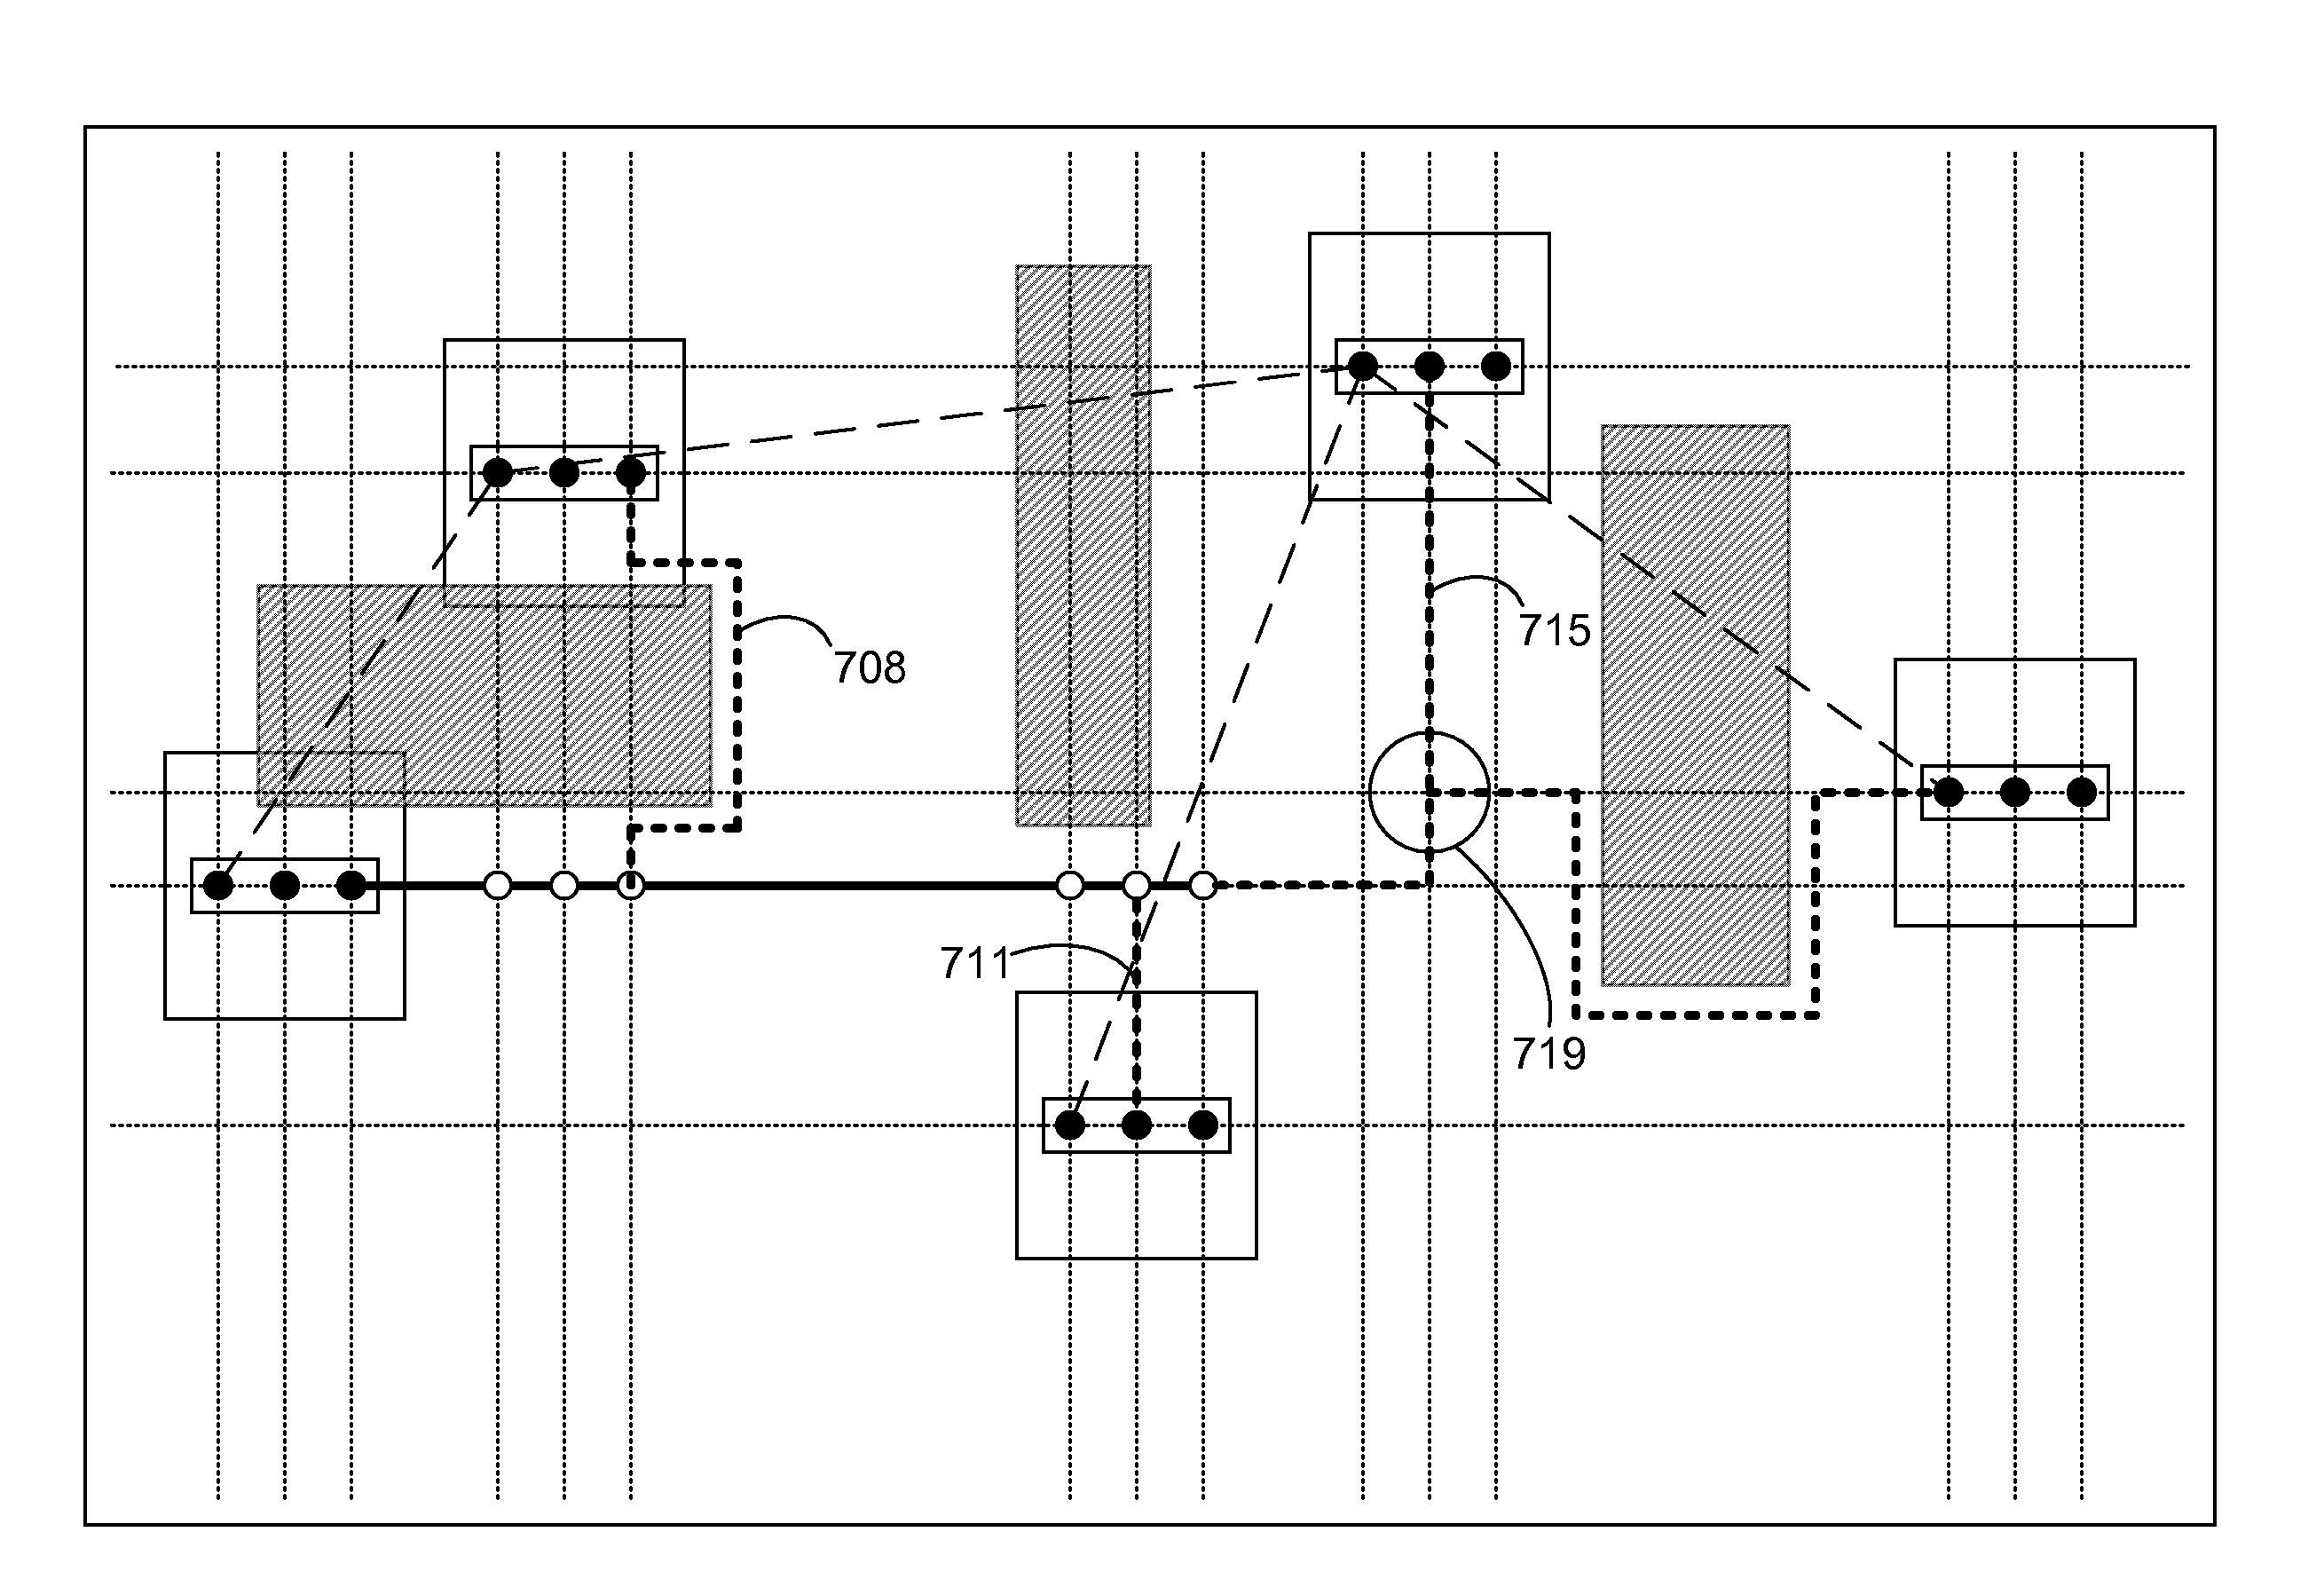 Automatic routing system with variable width interconnect